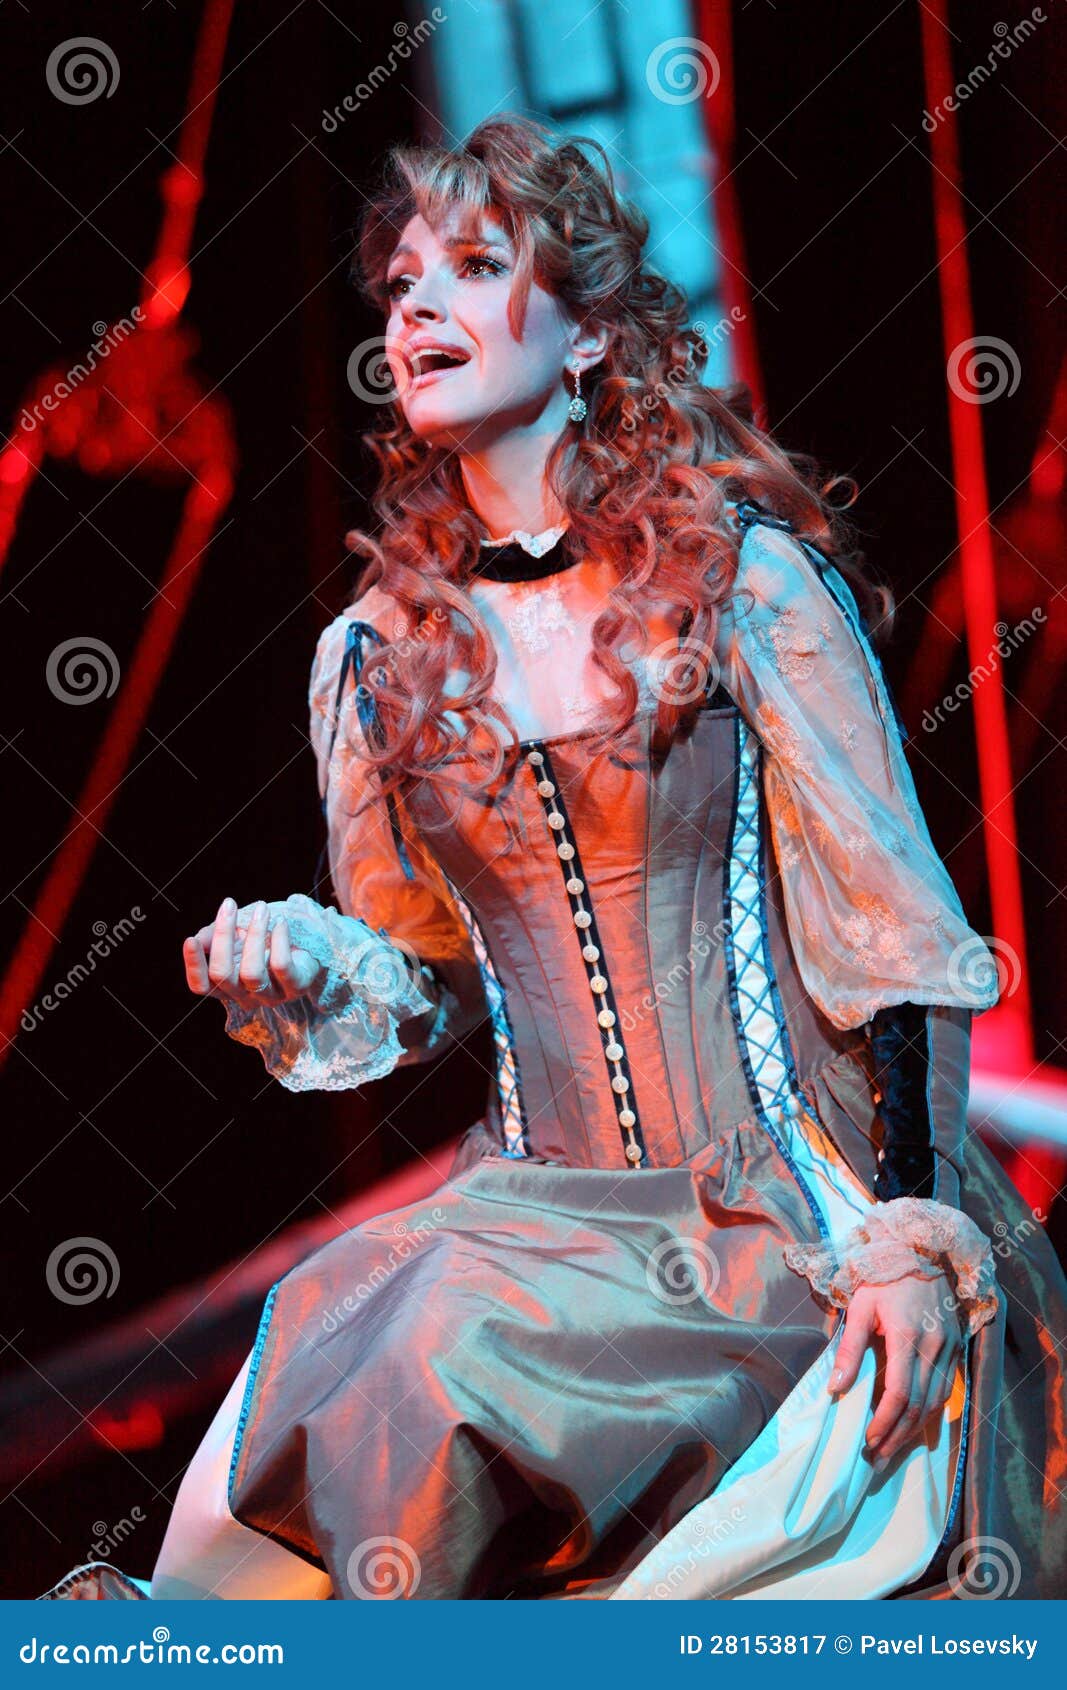 A,Makeeva sings in musical. MOSCOW - FEBRUARY 3: Actress Anastasia Makeeva sings in musical Francois Villon. Three days in Paris at Palace on Yauza on February 3, 2012 in Moscow, Russia.